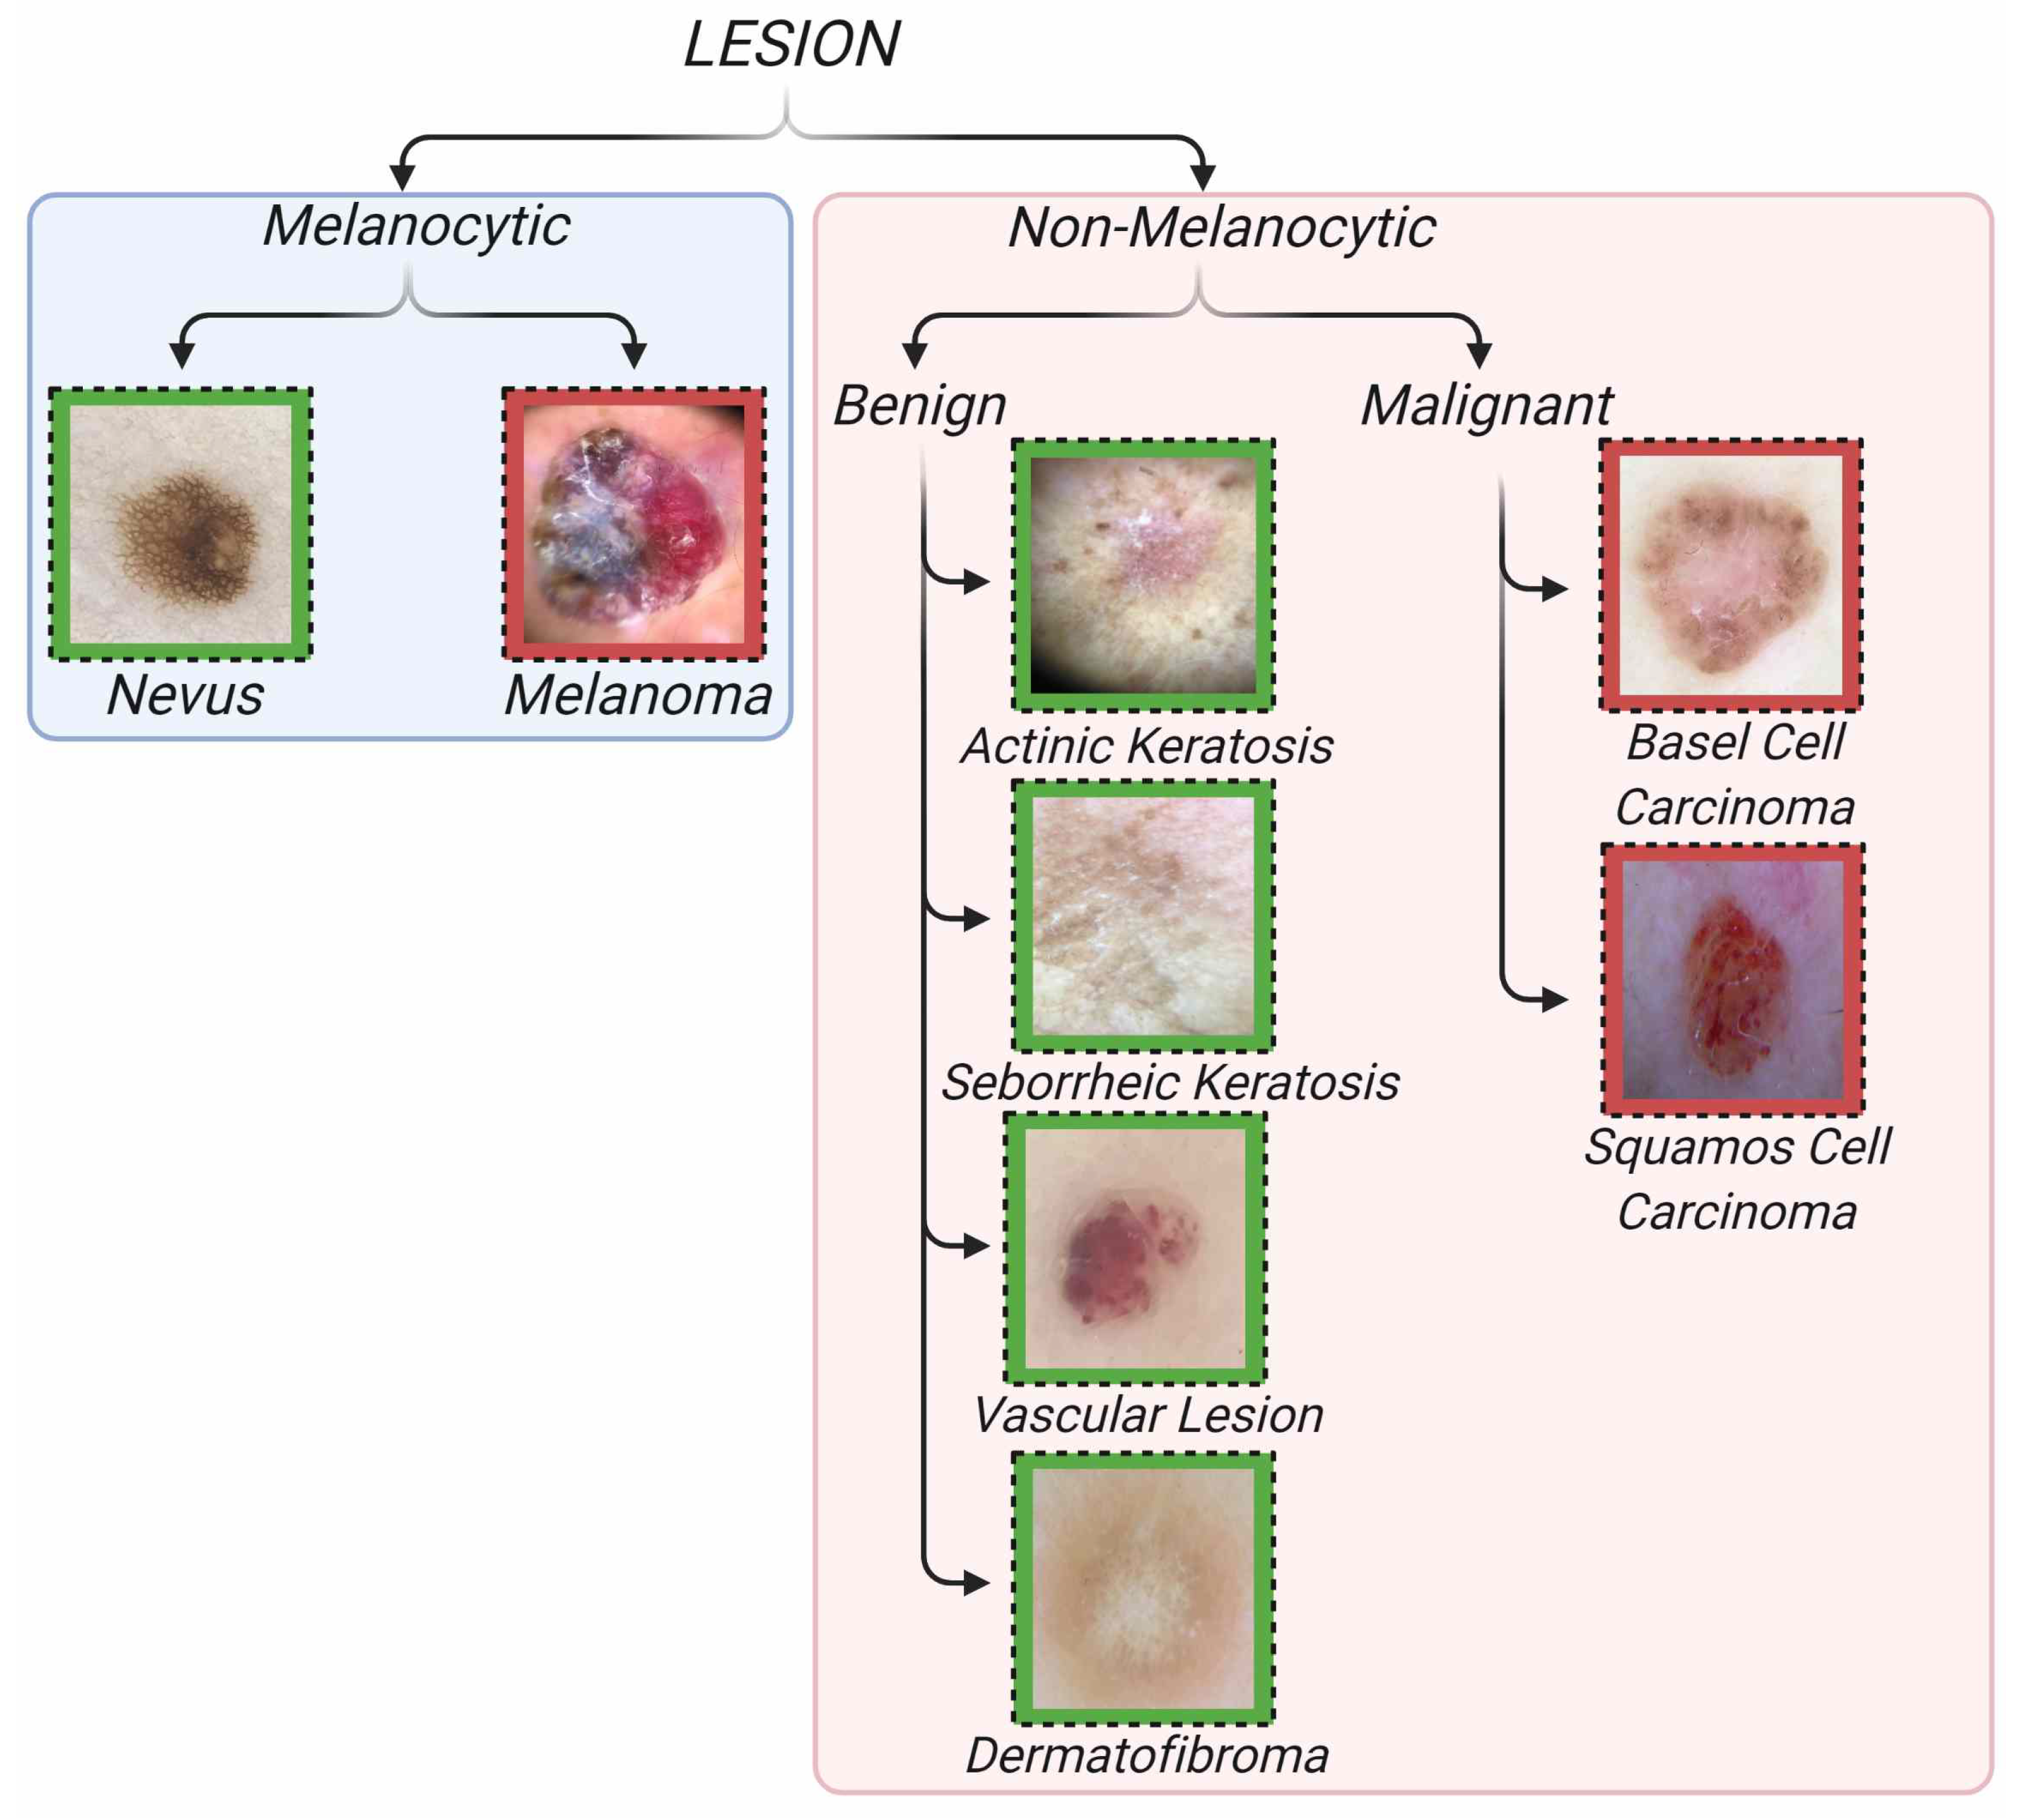 A Classification System in the Massive Weight Loss Patient Based on Skin  Lesions and Activity of Daily Living